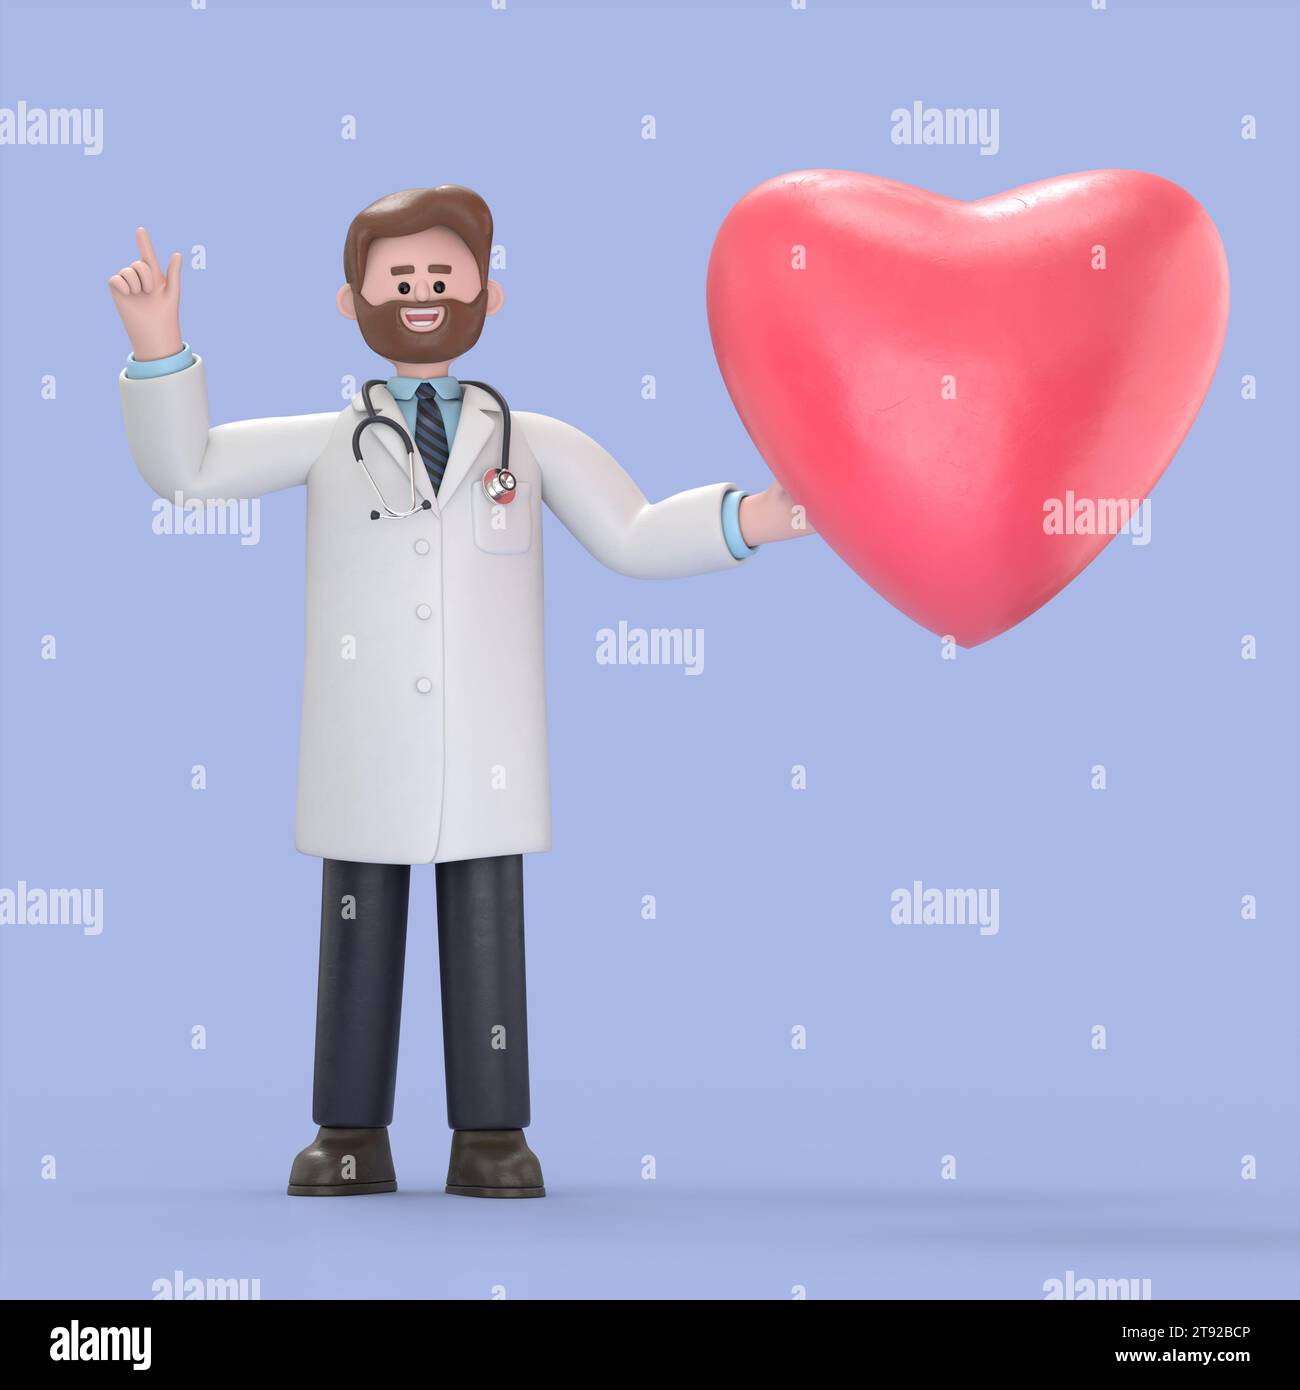 3D illustration of Male Doctor Iverson with heart shape.Medical presentation clip art isolated on blue background. Stock Photo